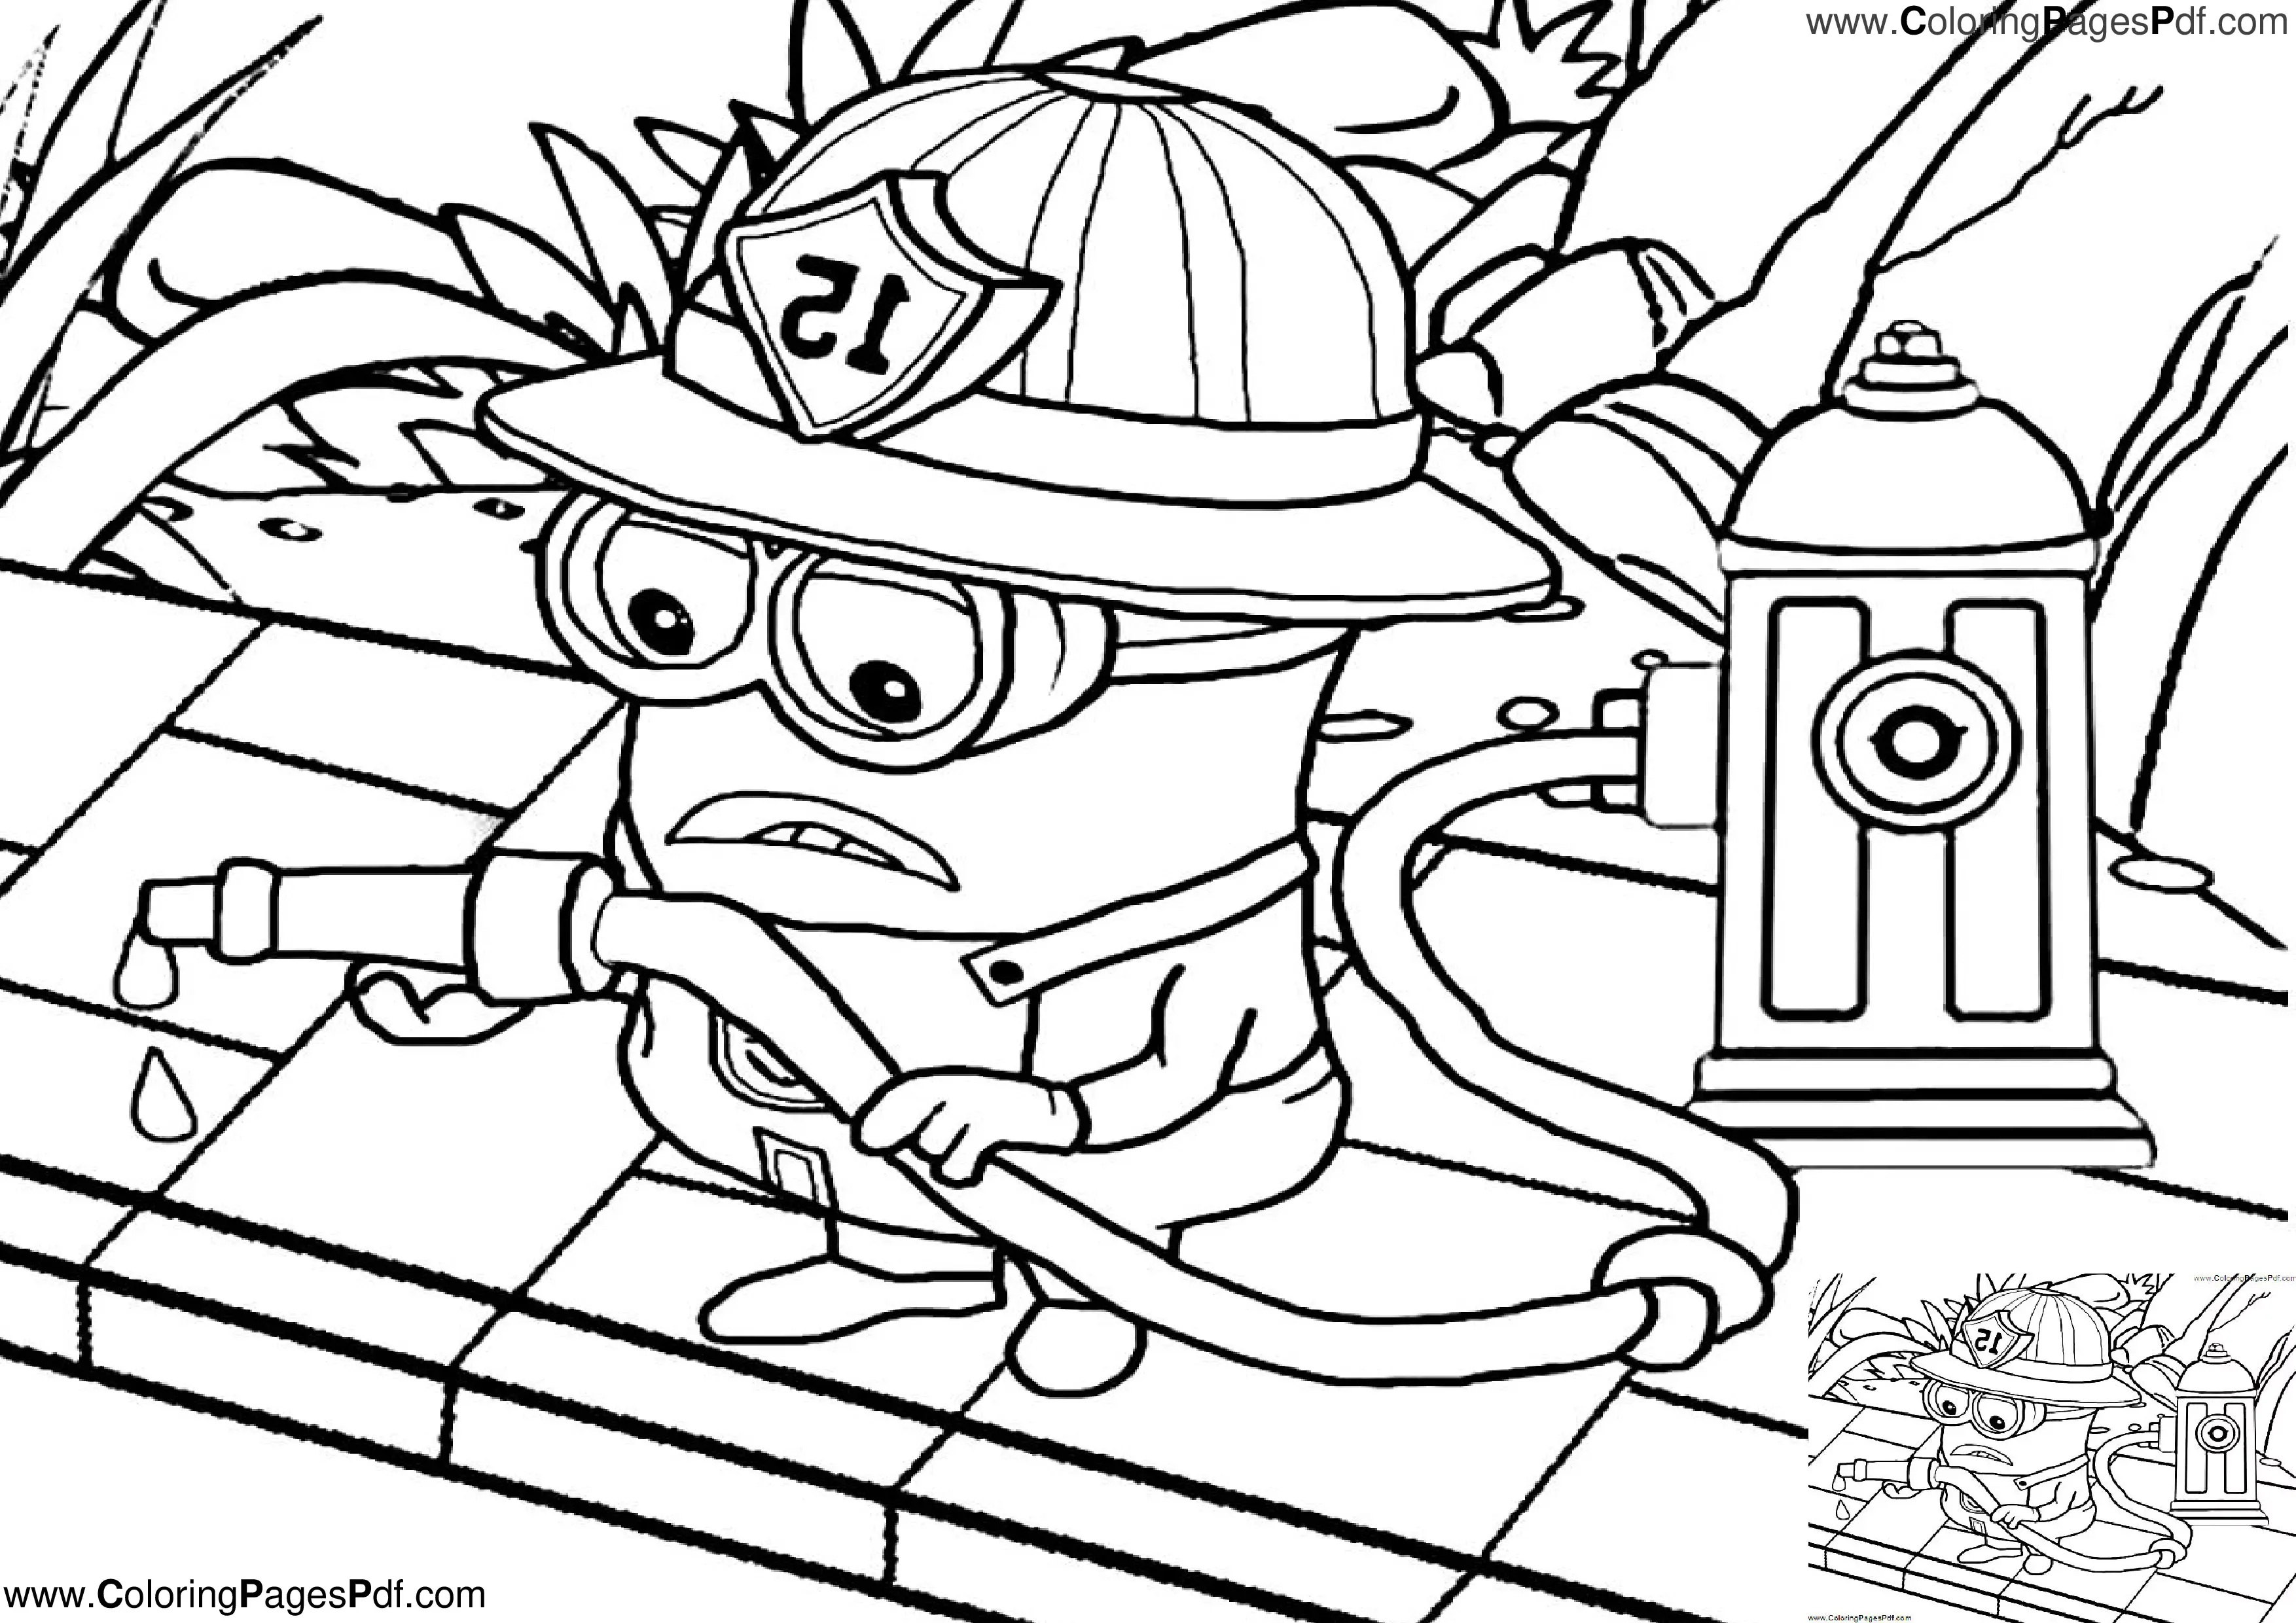 Minion coloring pages outline